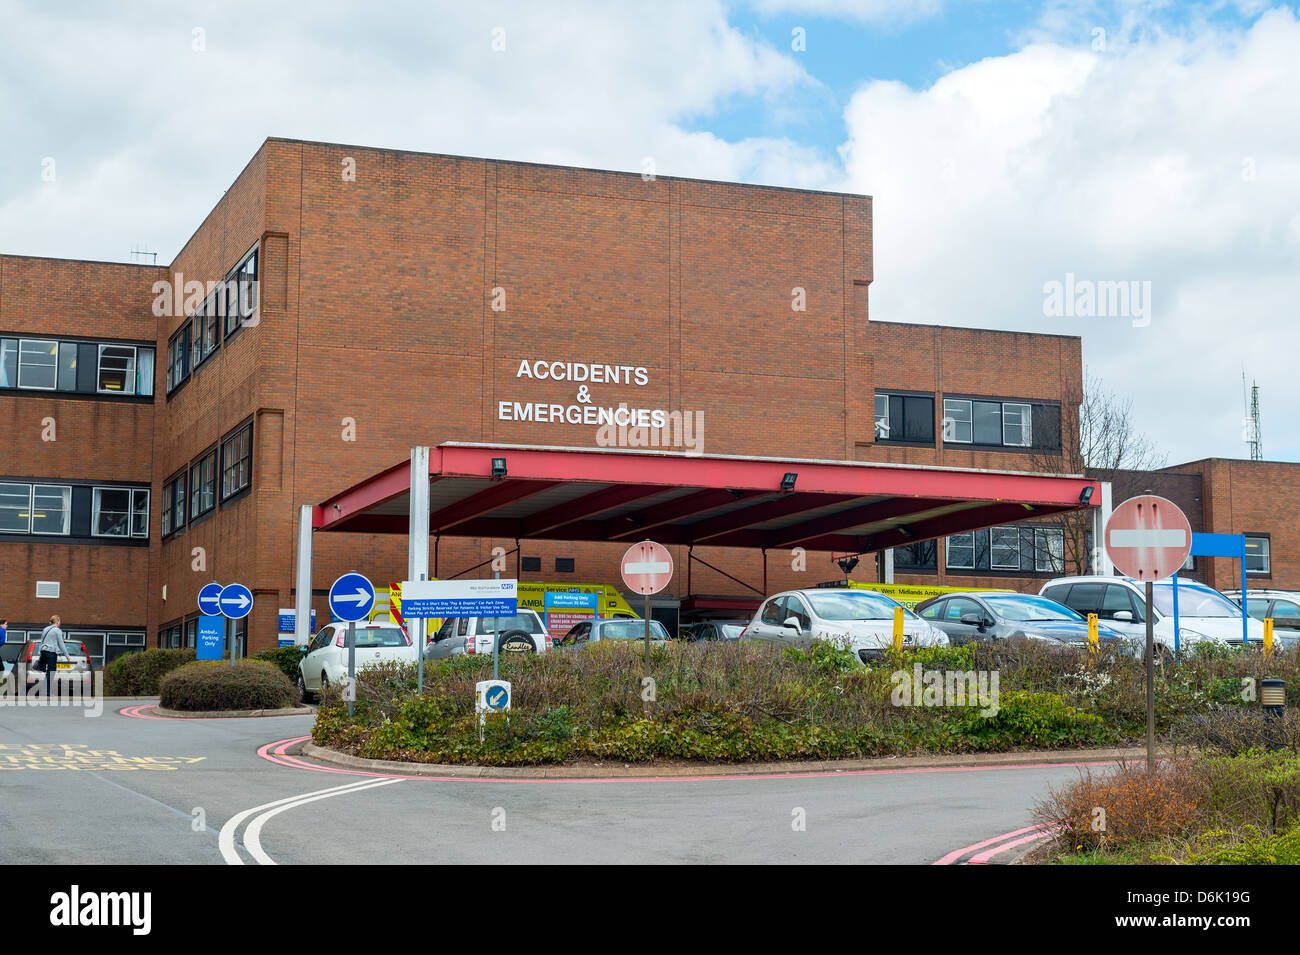 Stafford Hospital A&E, Mid Staffordshire NHS Foundation Trust under investigation due to high mortality rates. Stock Photo